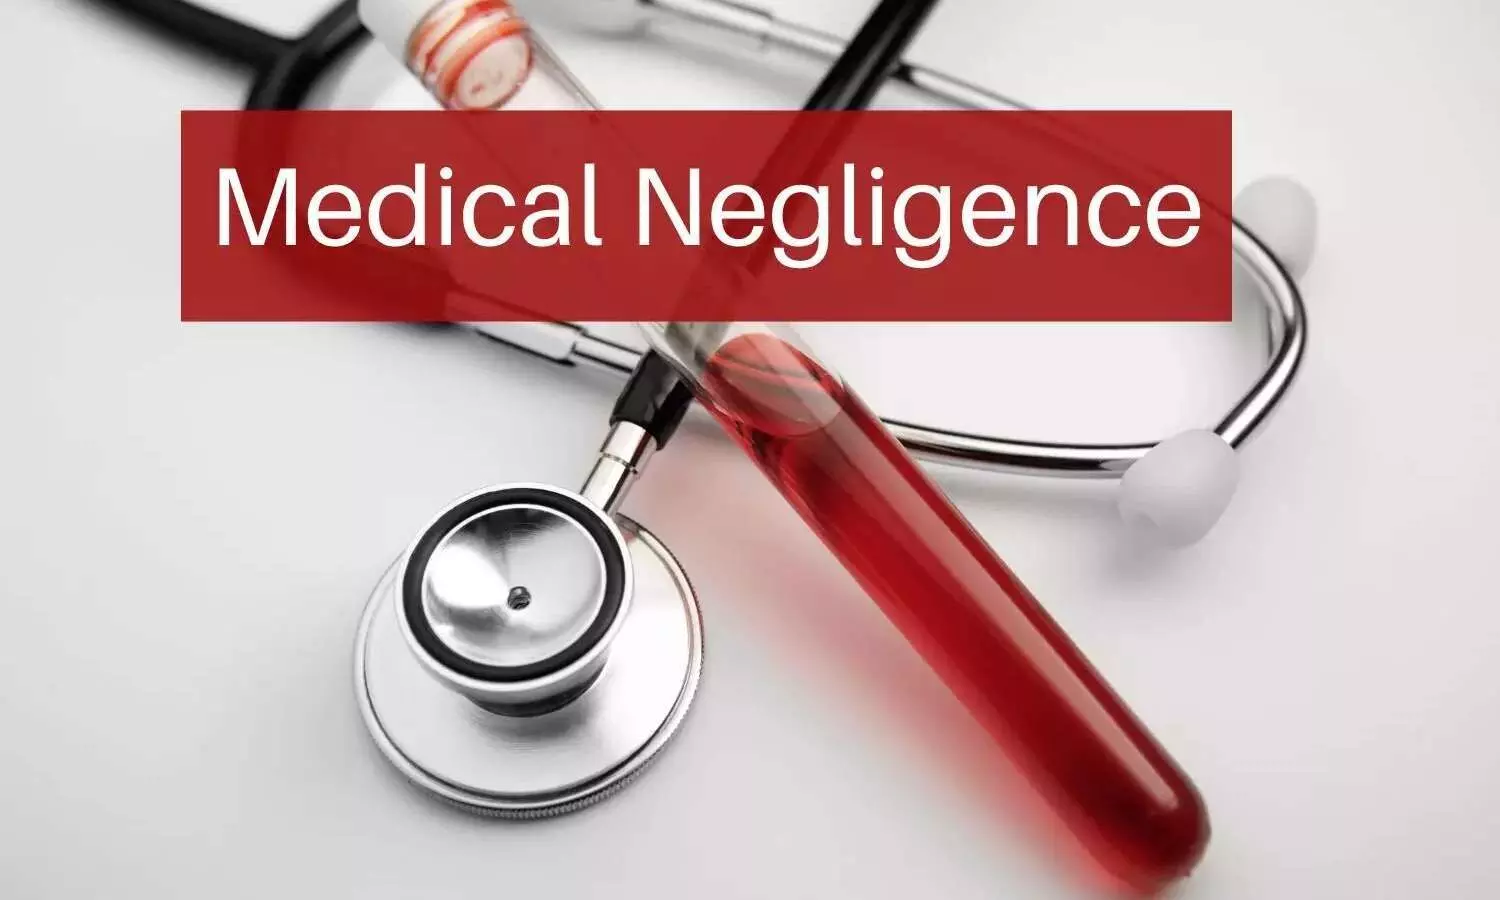 Delay in administering Remdesivir: 5 Noida hospital doctors booked under IPC 304A for negligence in treating COVID patient